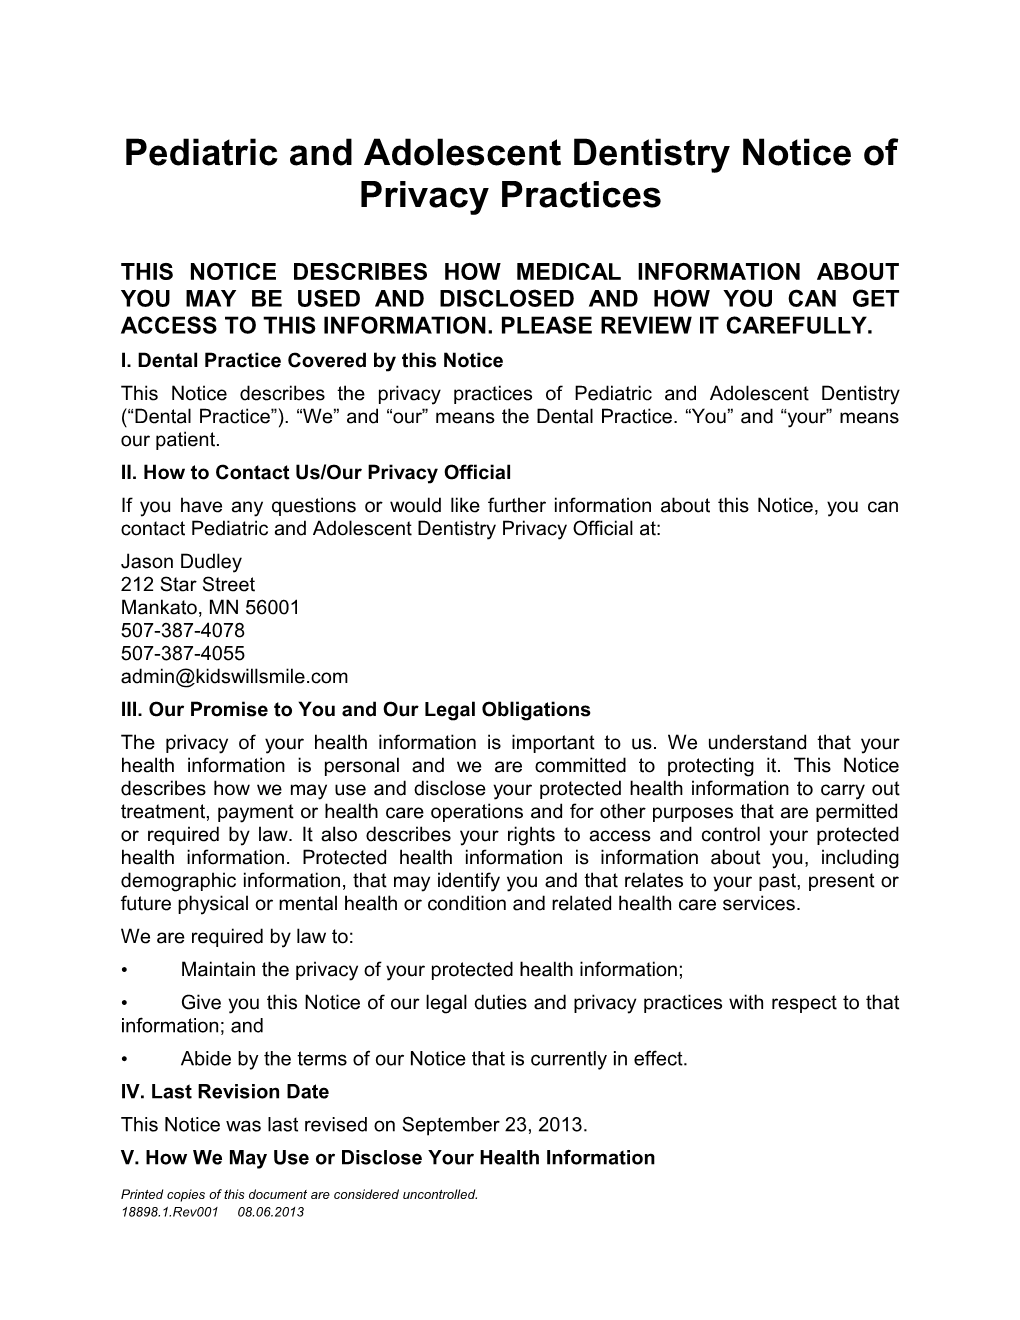 Pediatric and Adolescent Dentistry Notice of Privacy Practices